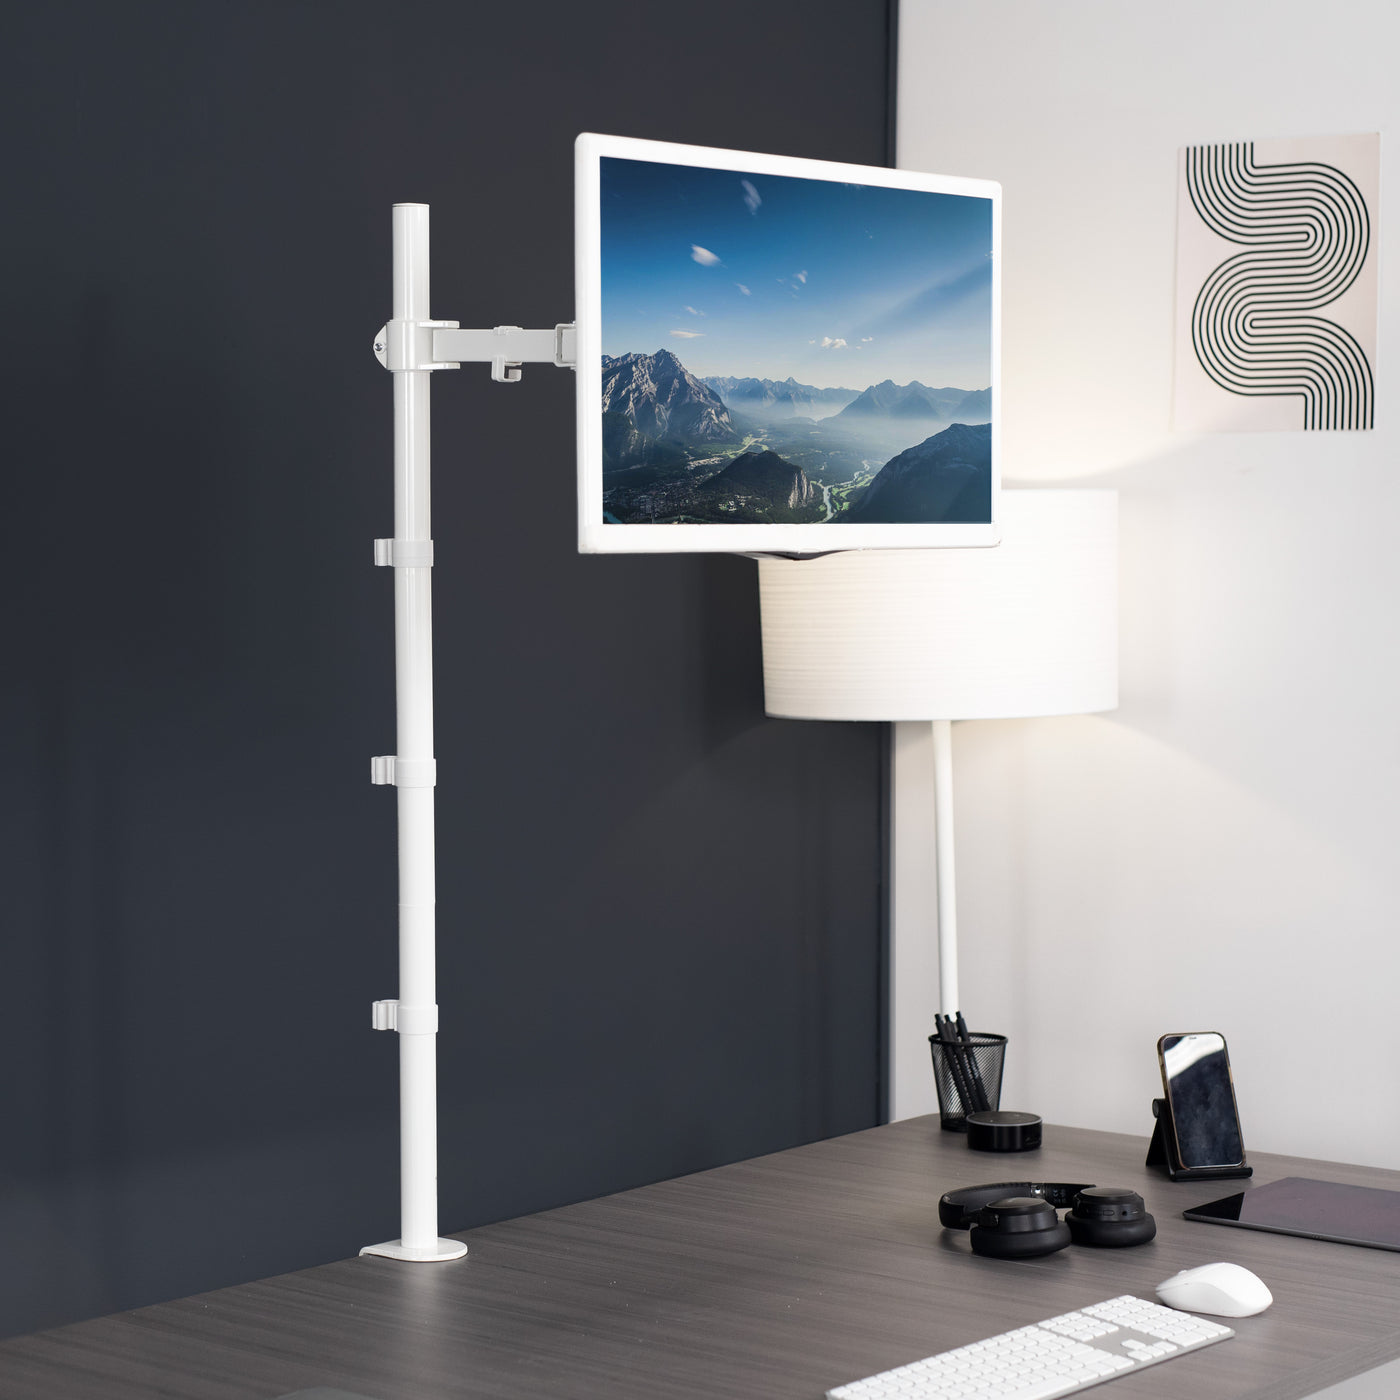 Extra tall desk mount for single monitor provides sit or stand application for the user.